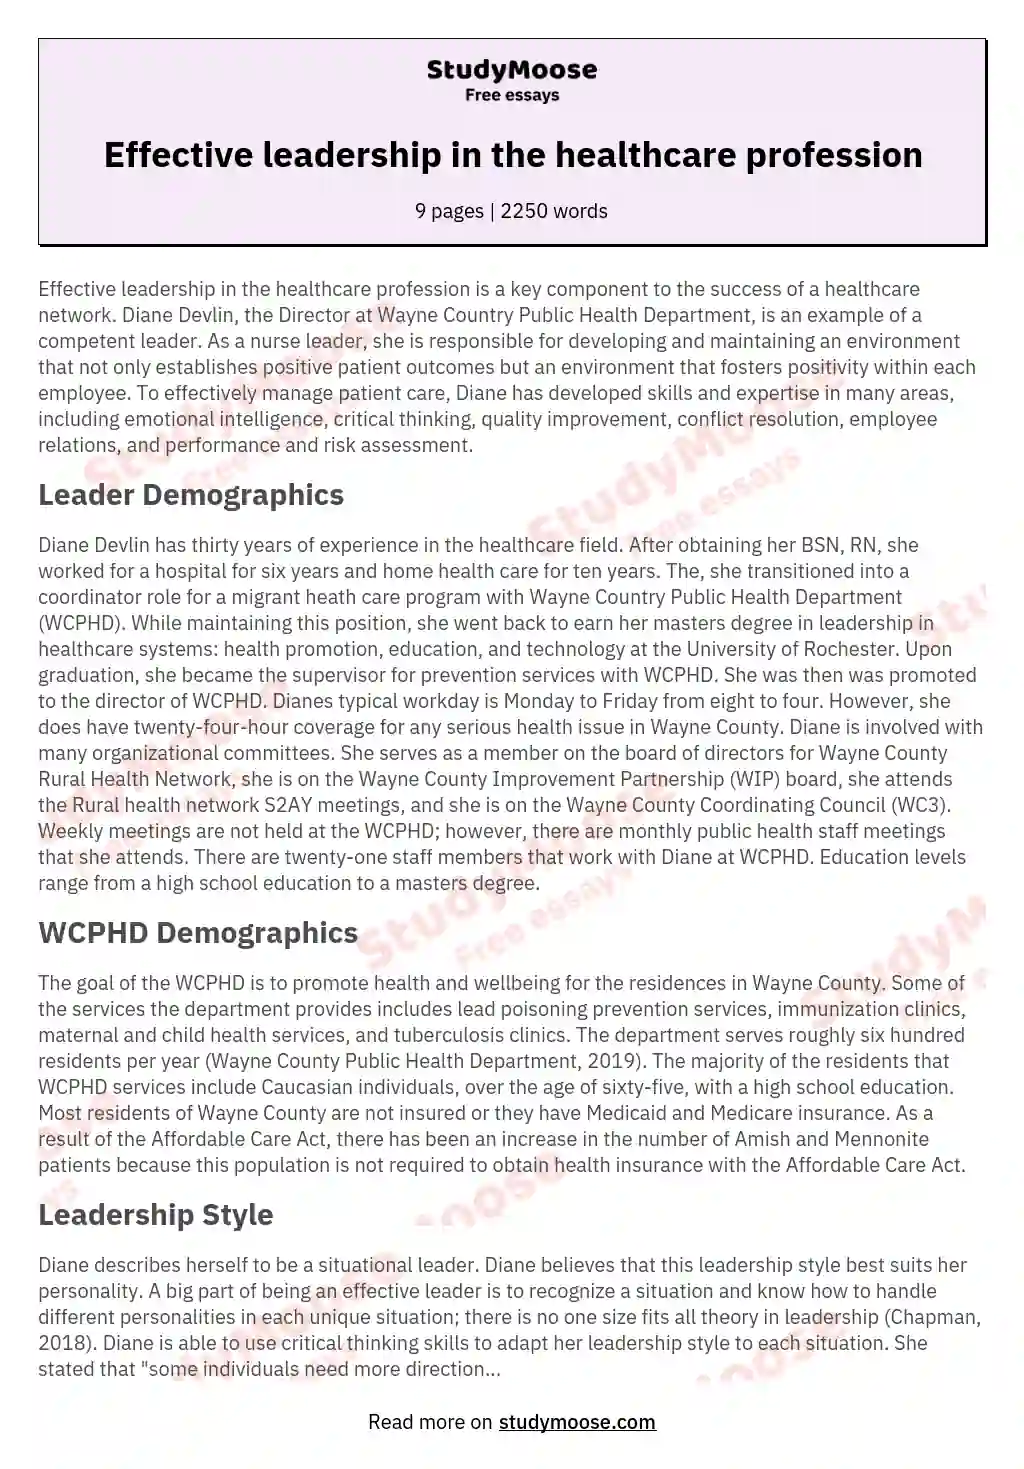 Effective leadership in the healthcare profession essay